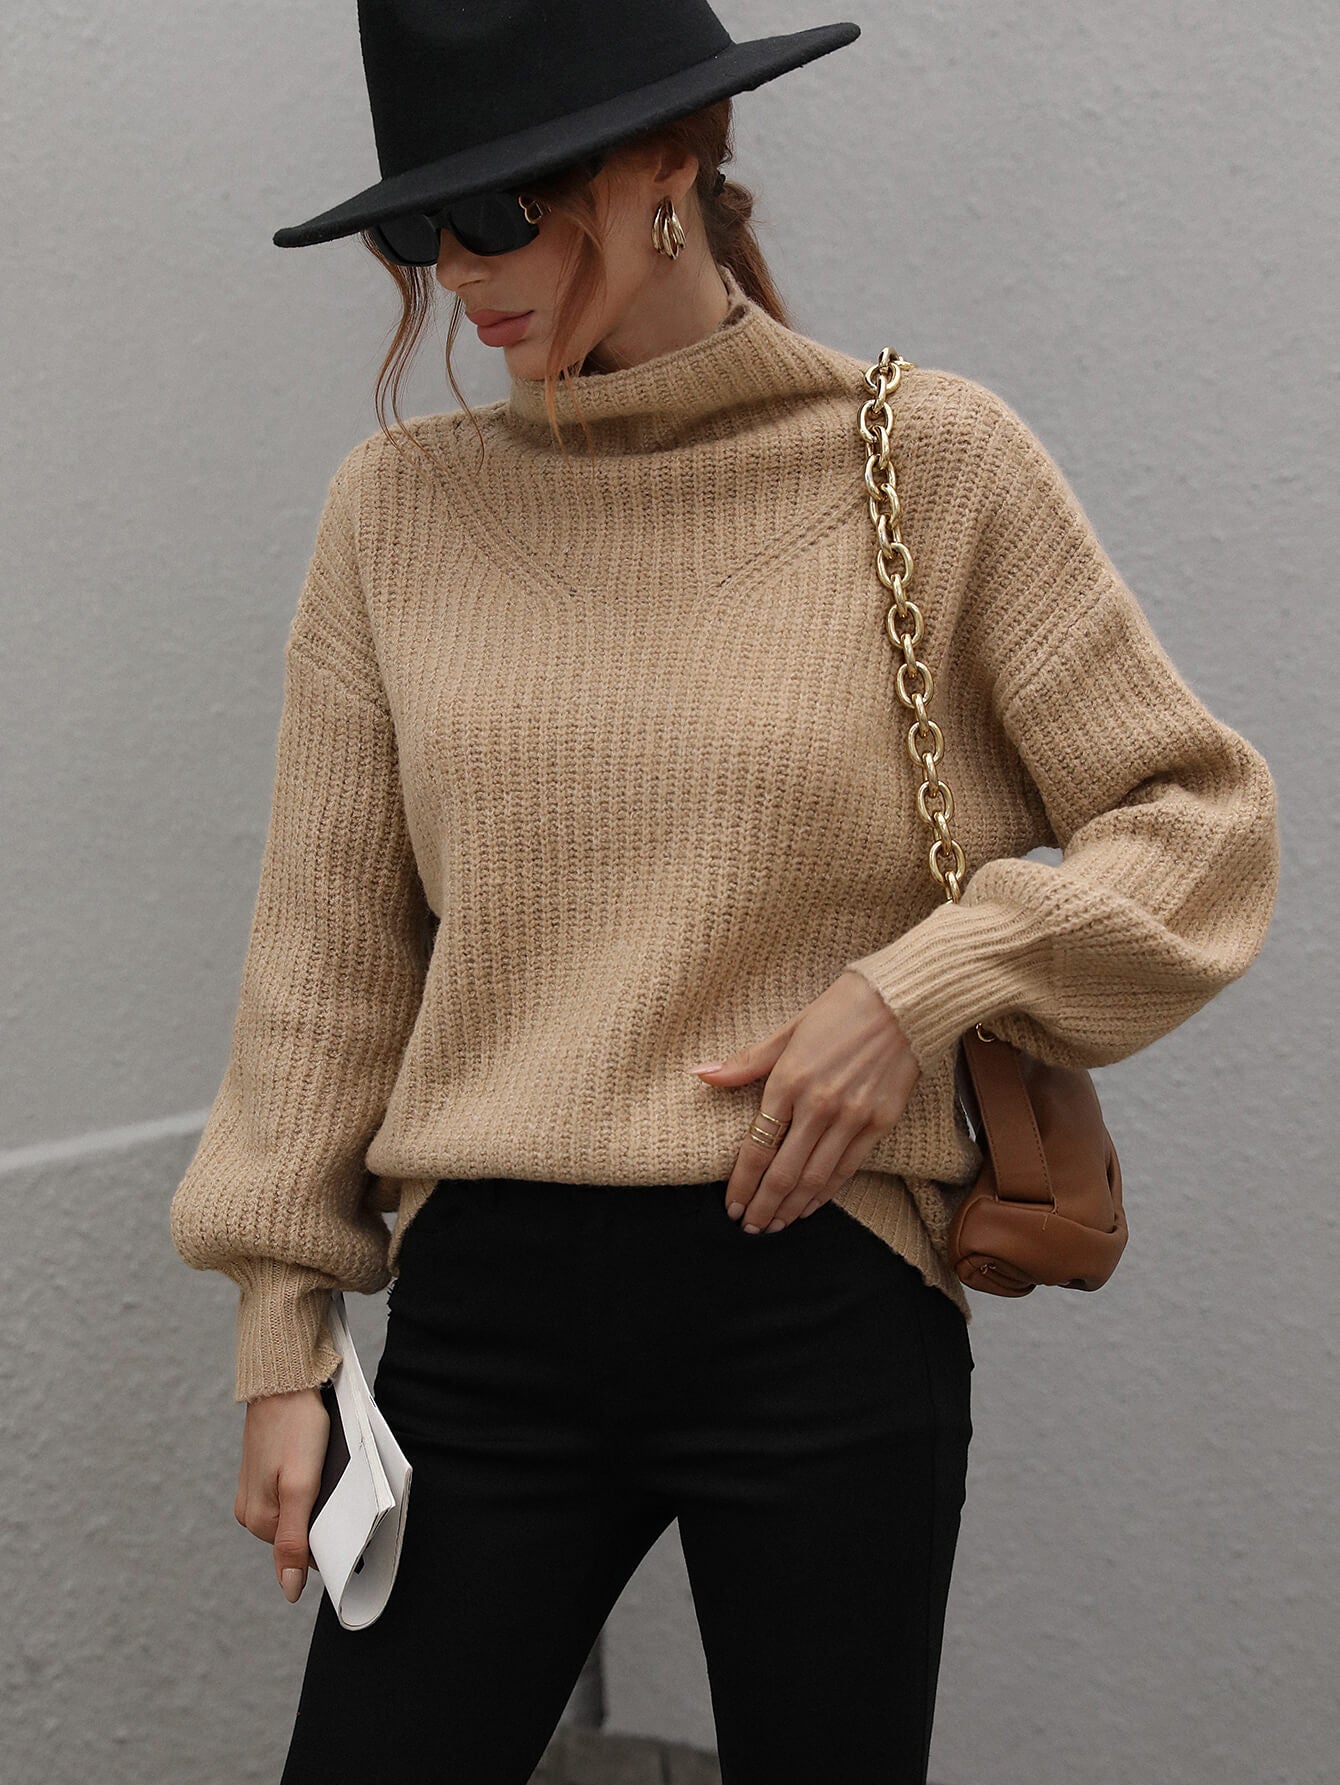 High Neck Balloon Sleeve Rib-Knit Pullover Sweater - Fashion Girl Online Store